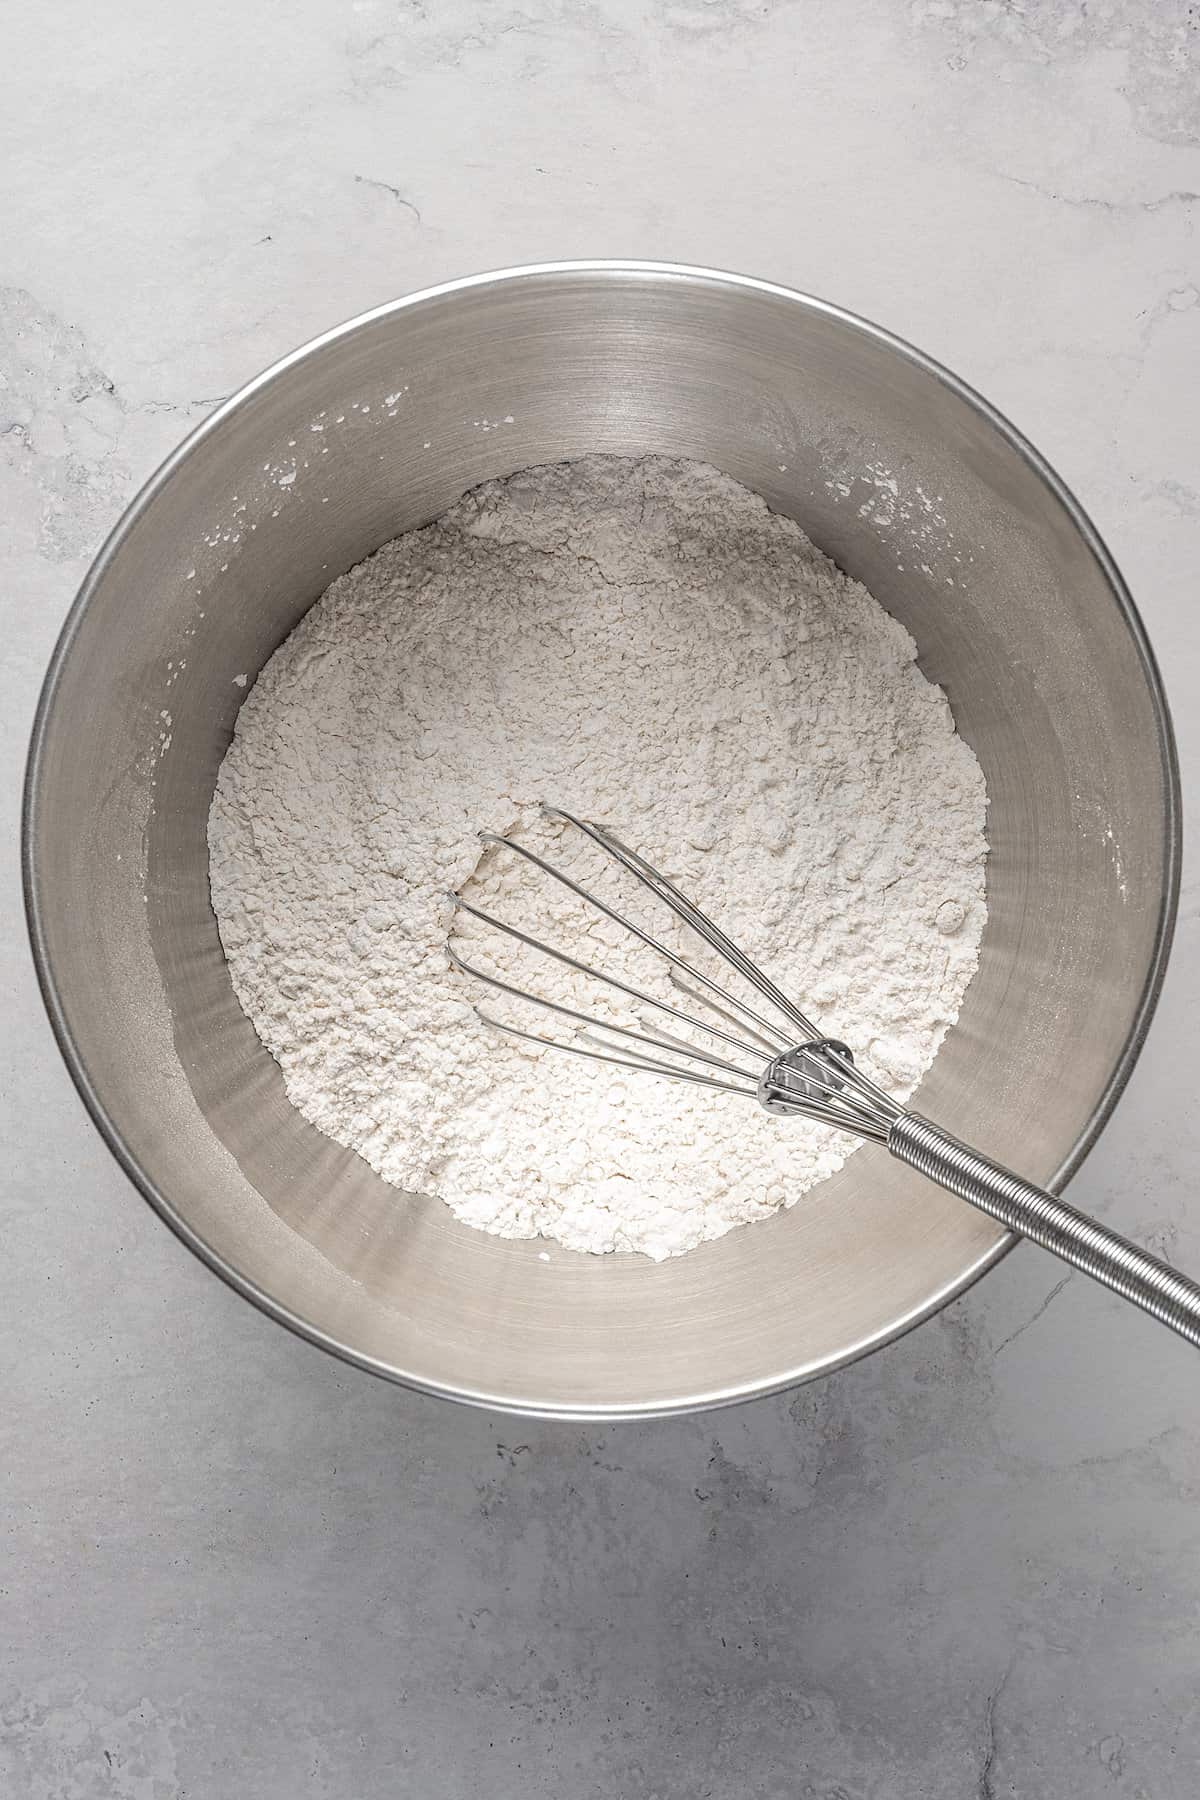 Dry ingredients whisked together in a metal mixing bowl.